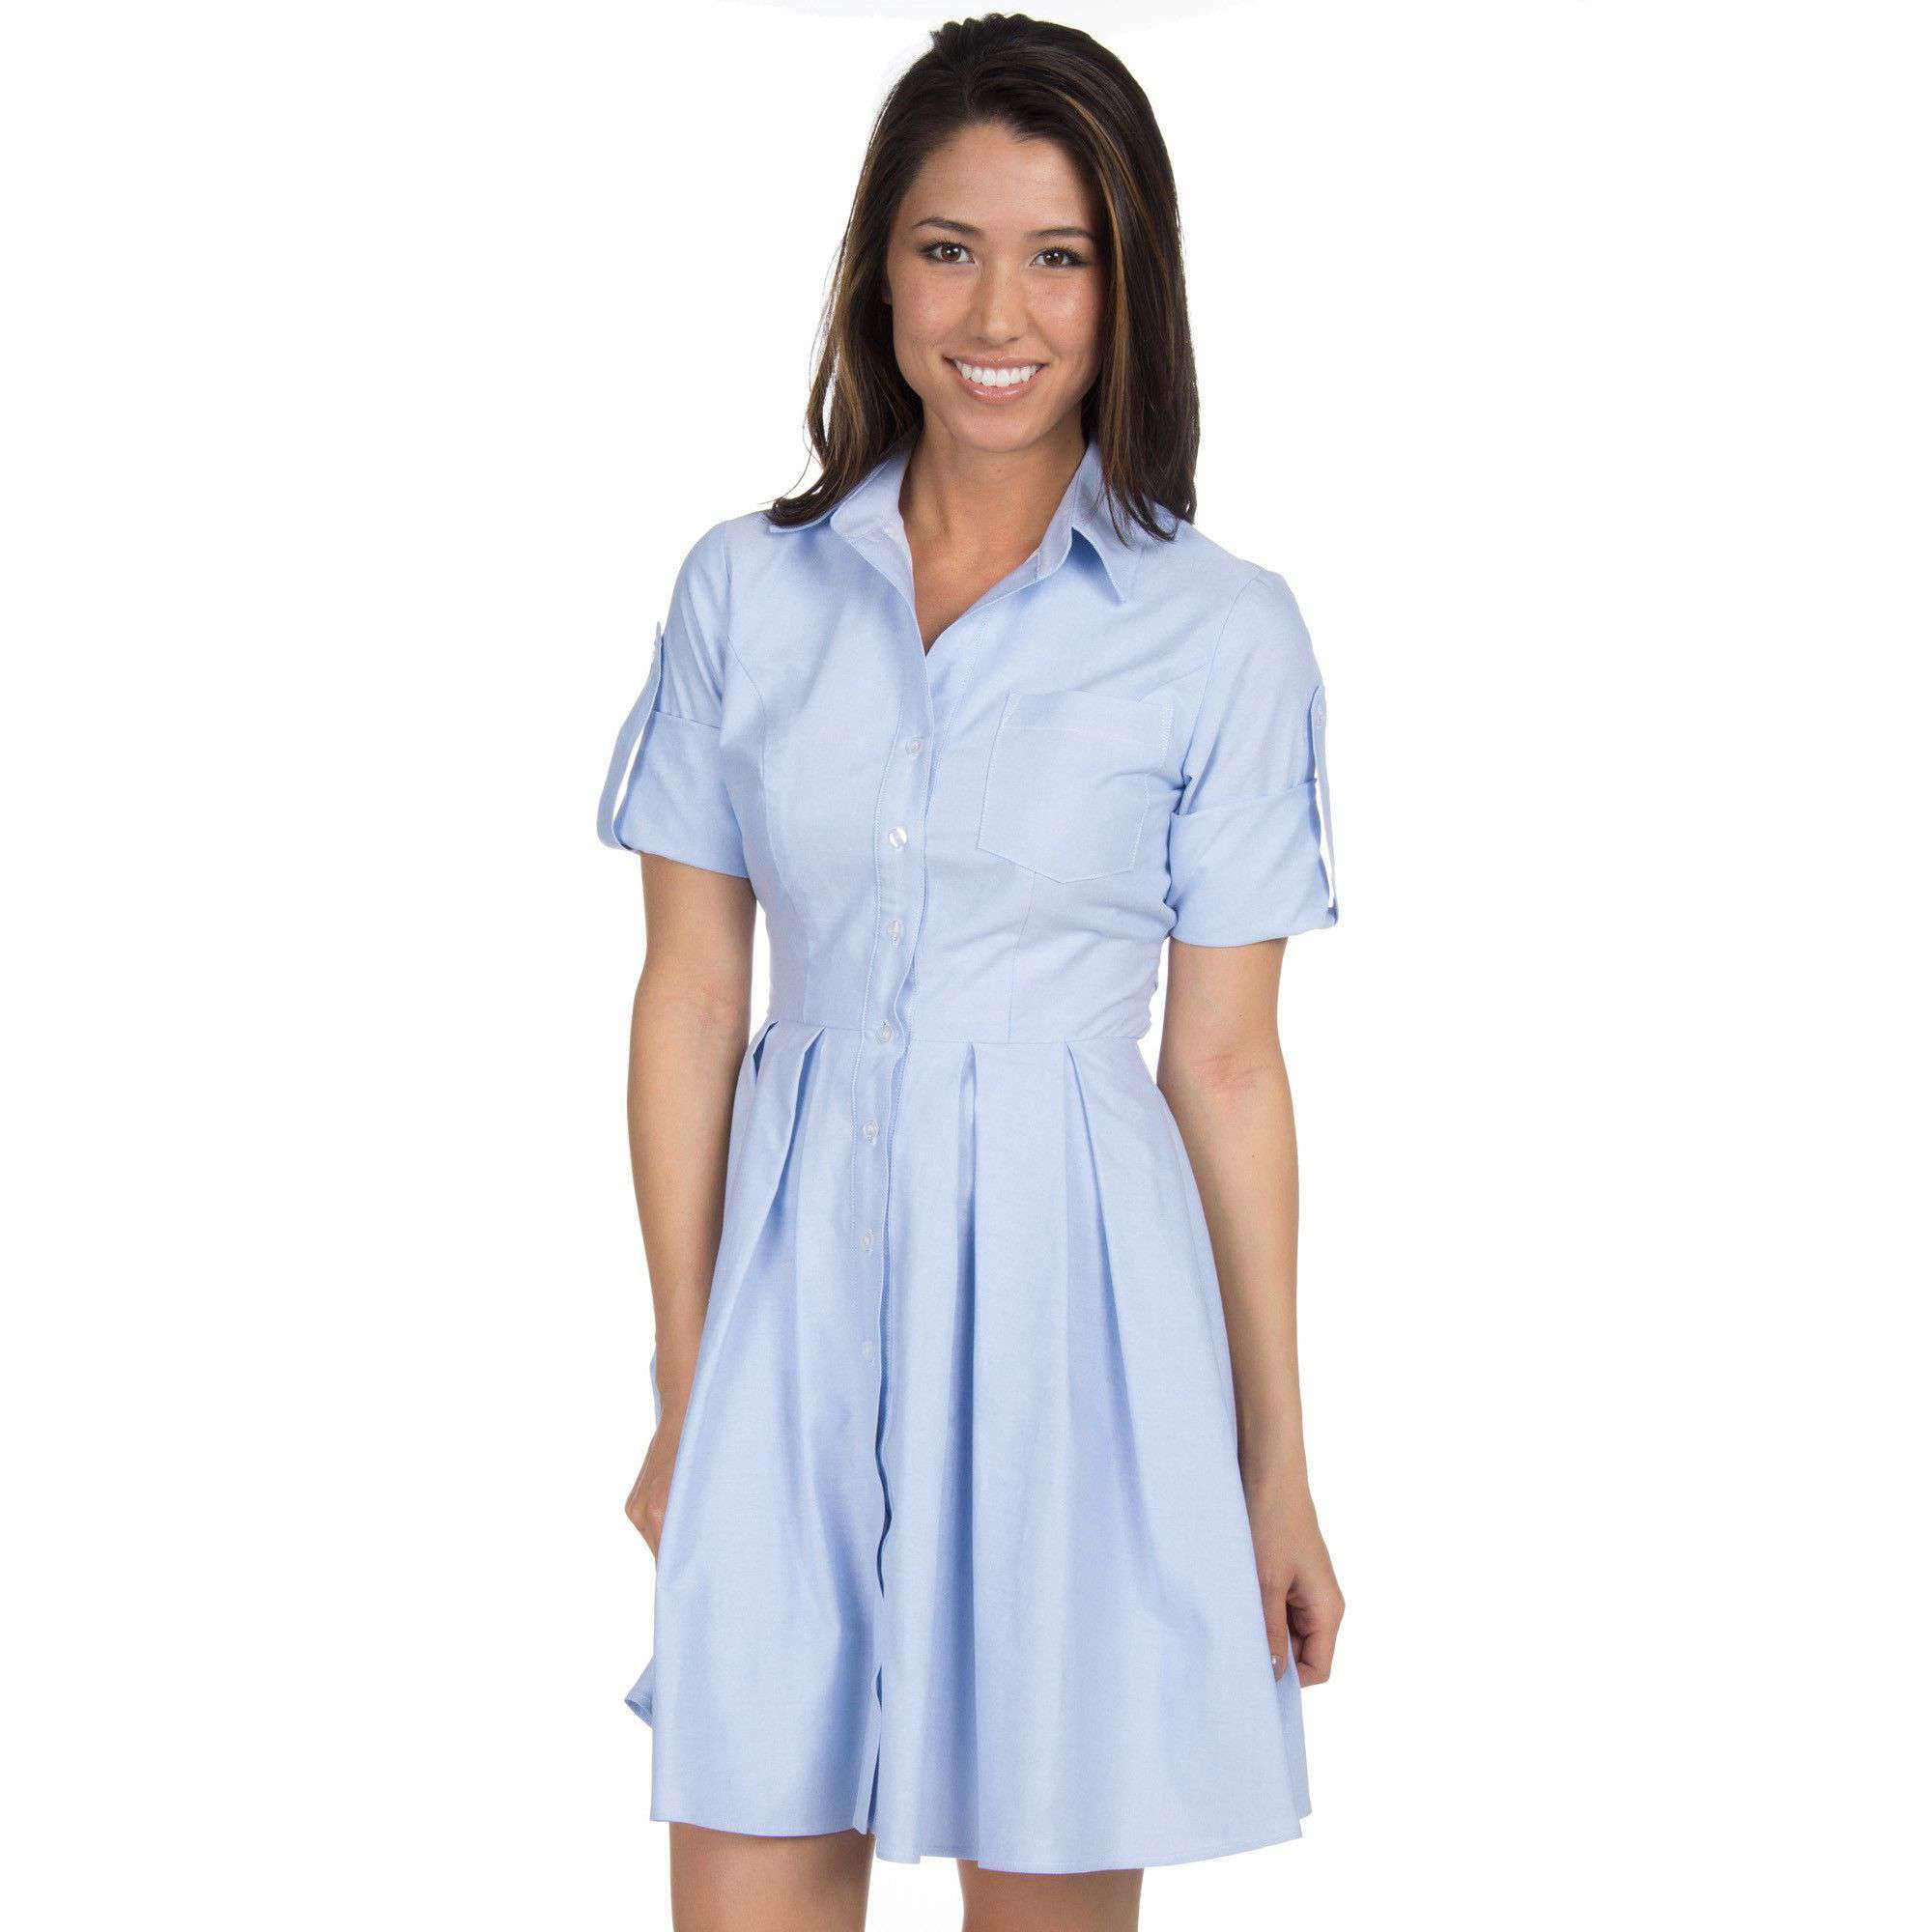 The Taylor Oxford Dress in Blue by Lauren James - Country Club Prep